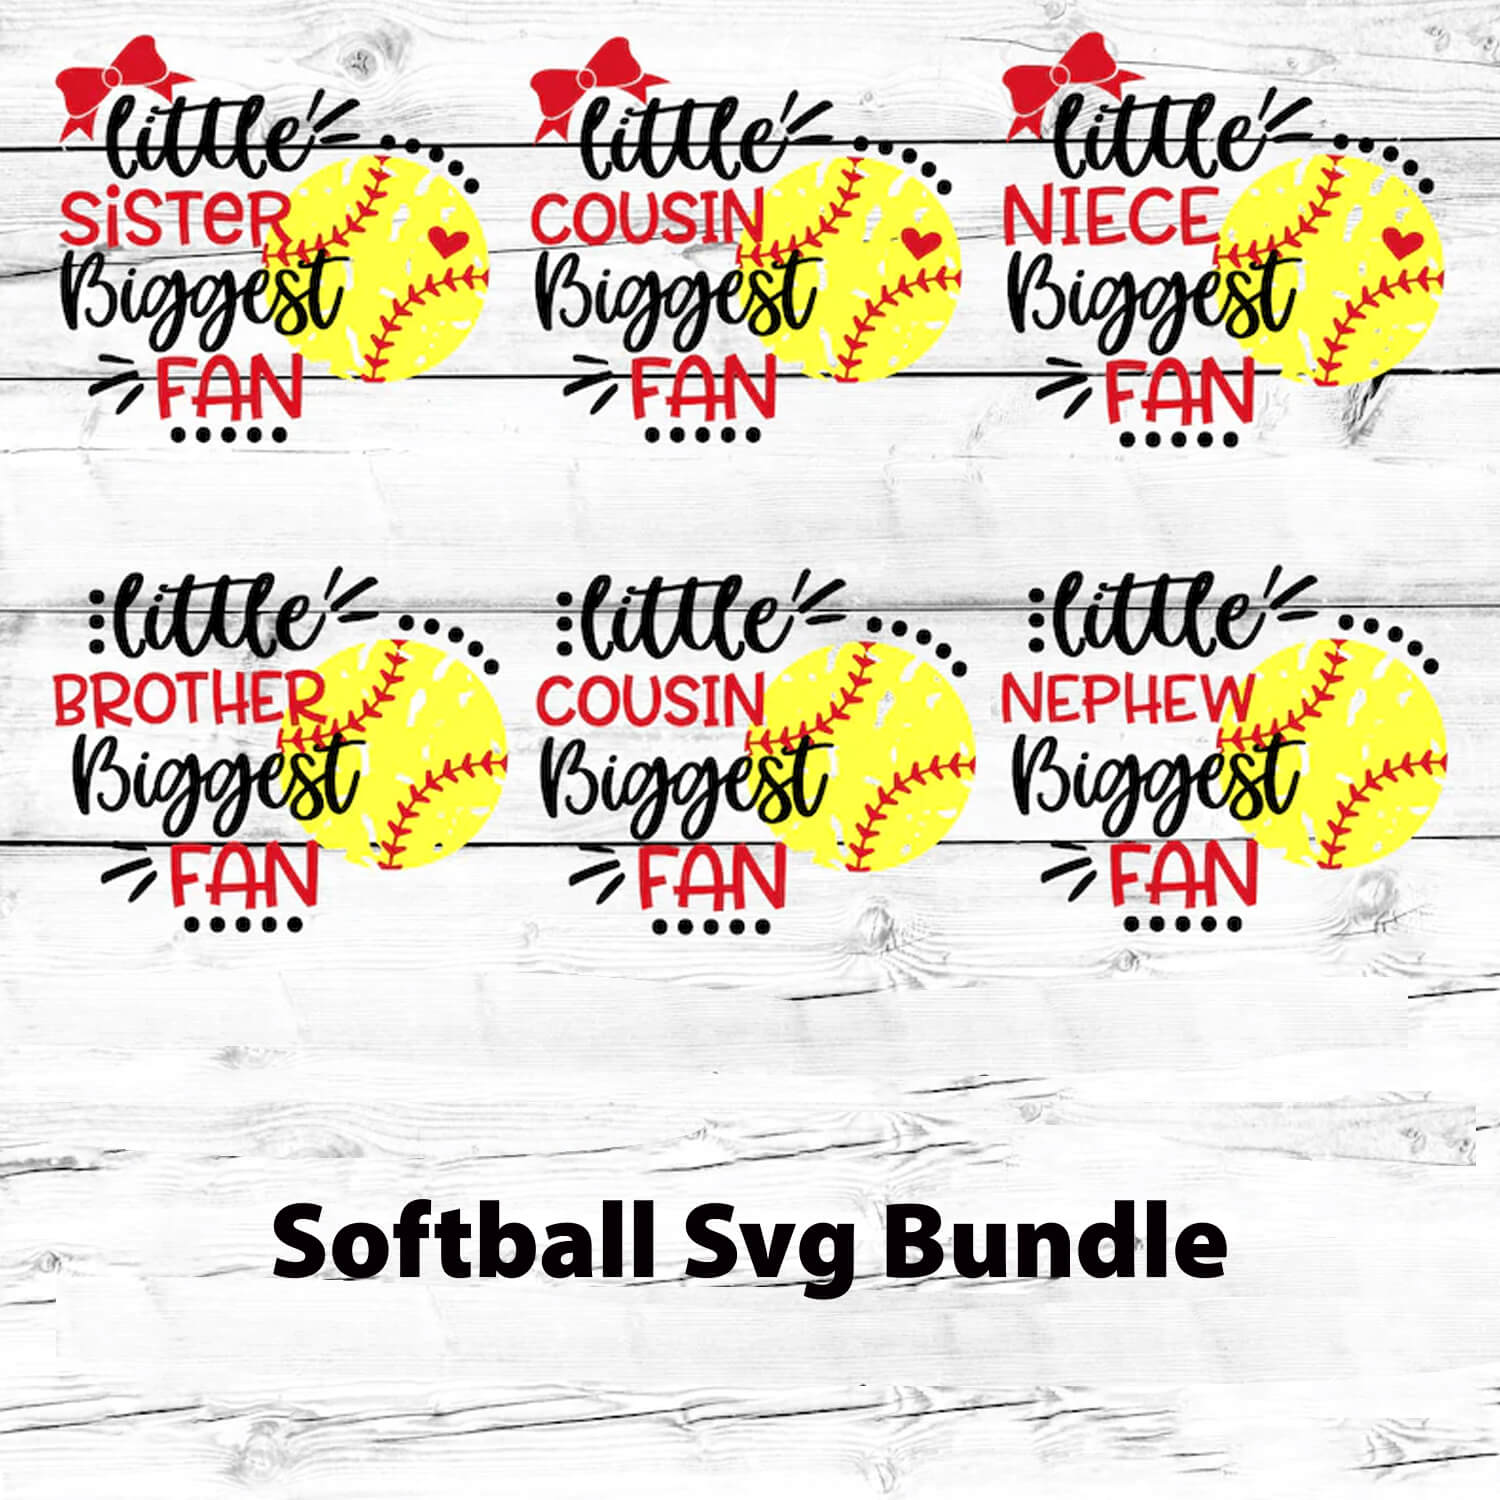 Six softball fan lettering designs for boys and girls.